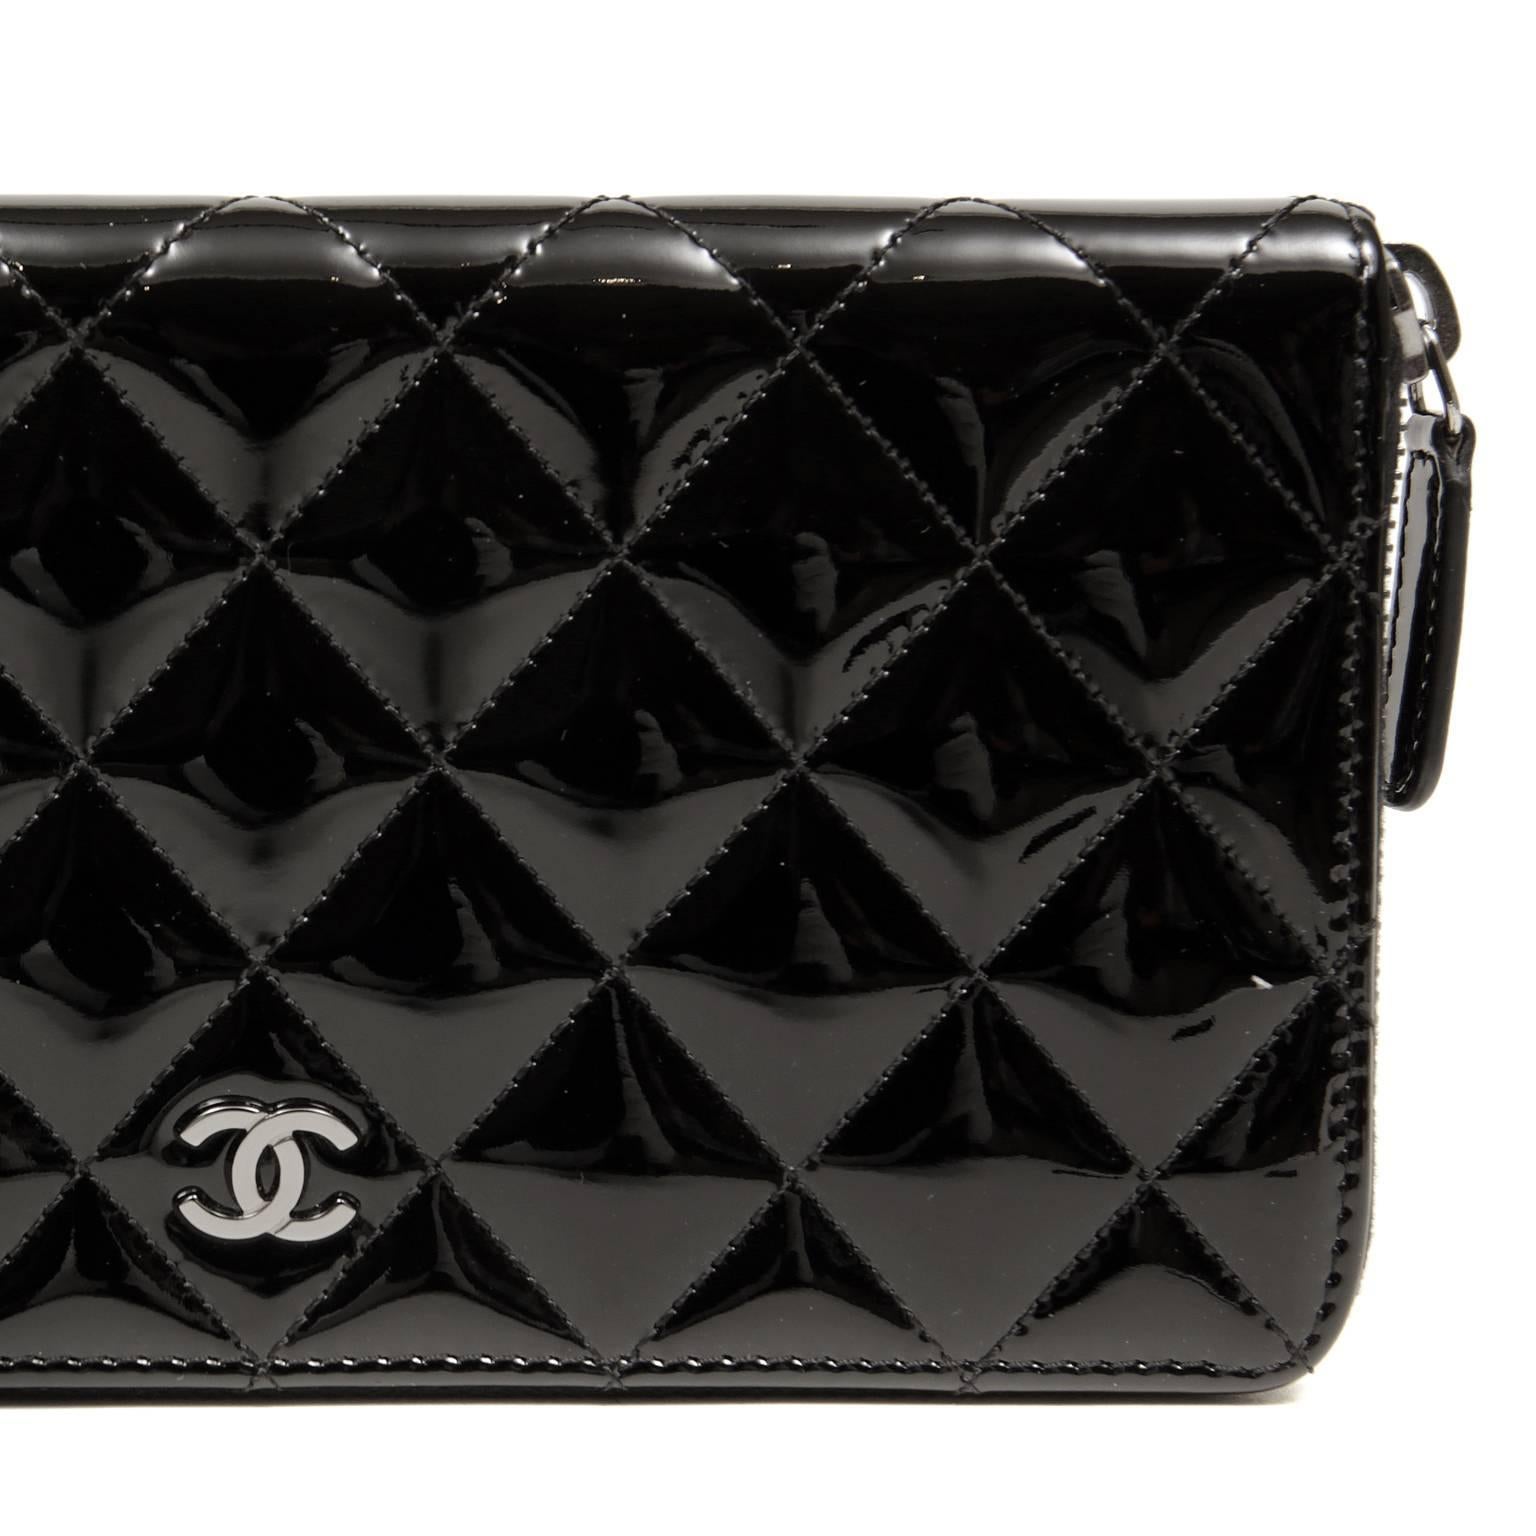 Chanel Black Patent Leather Large Zip Wallet 2